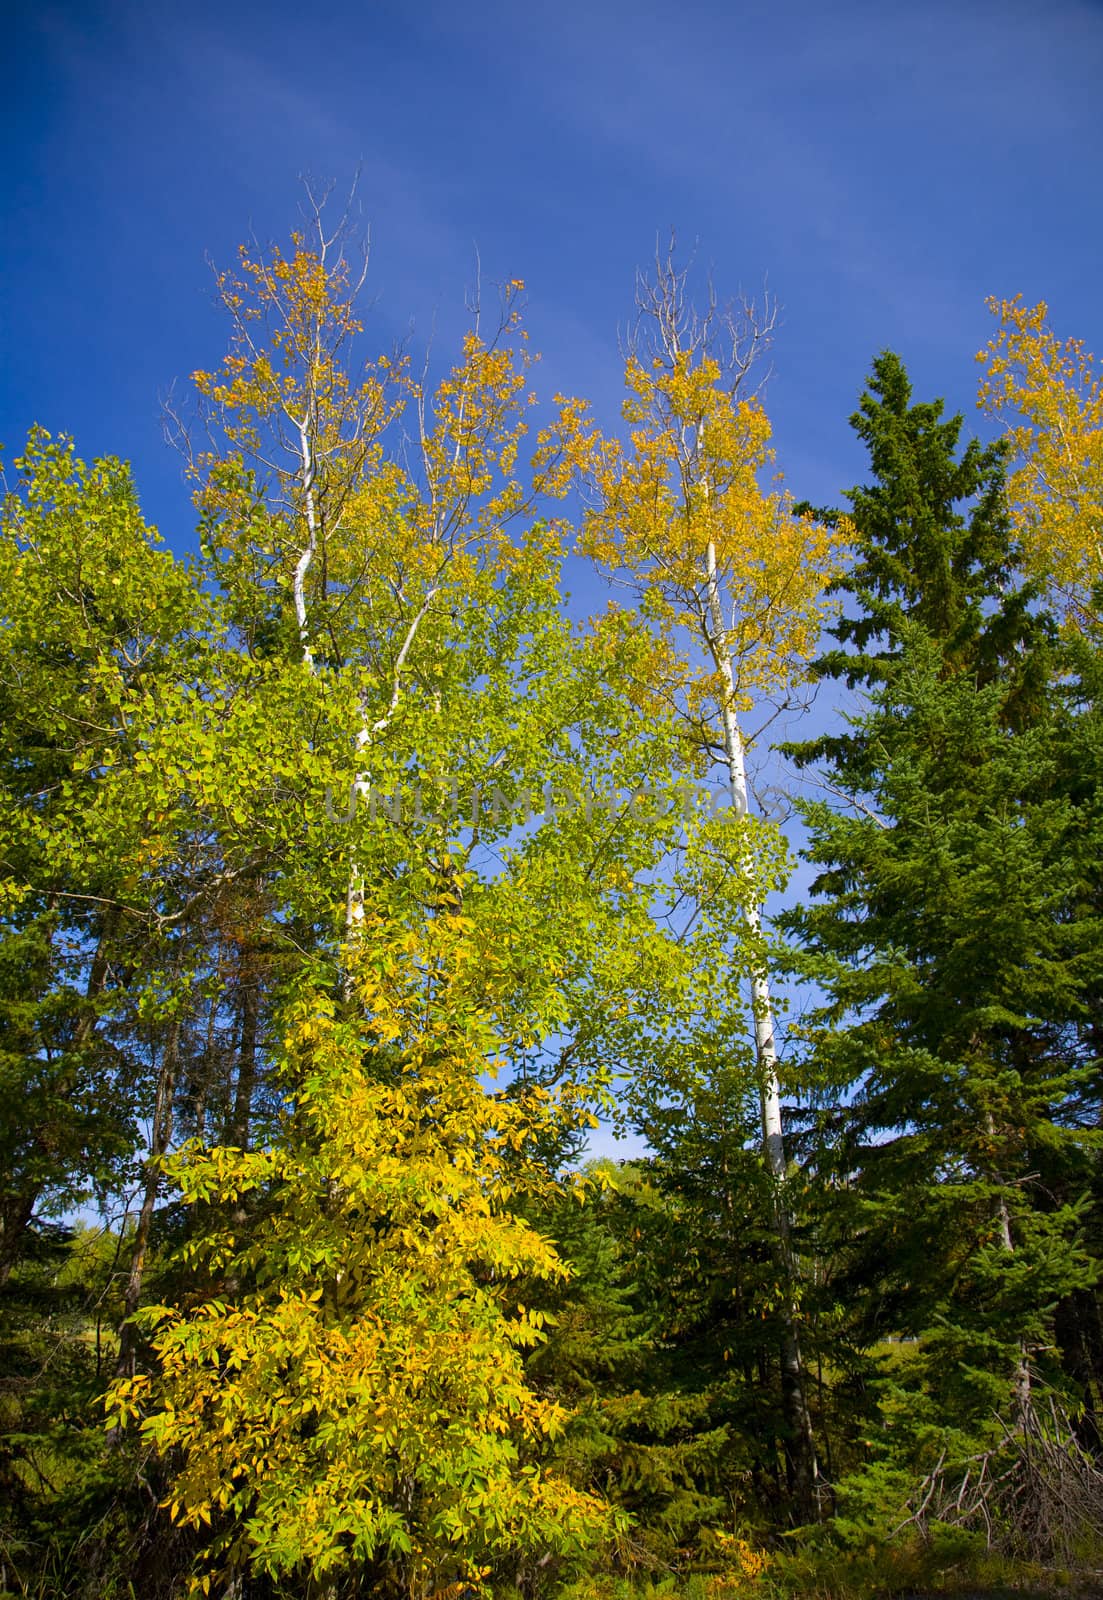 Yellow, green, and blue sky in a September image of the Sax Zim bog of the North Woods of Minnesota